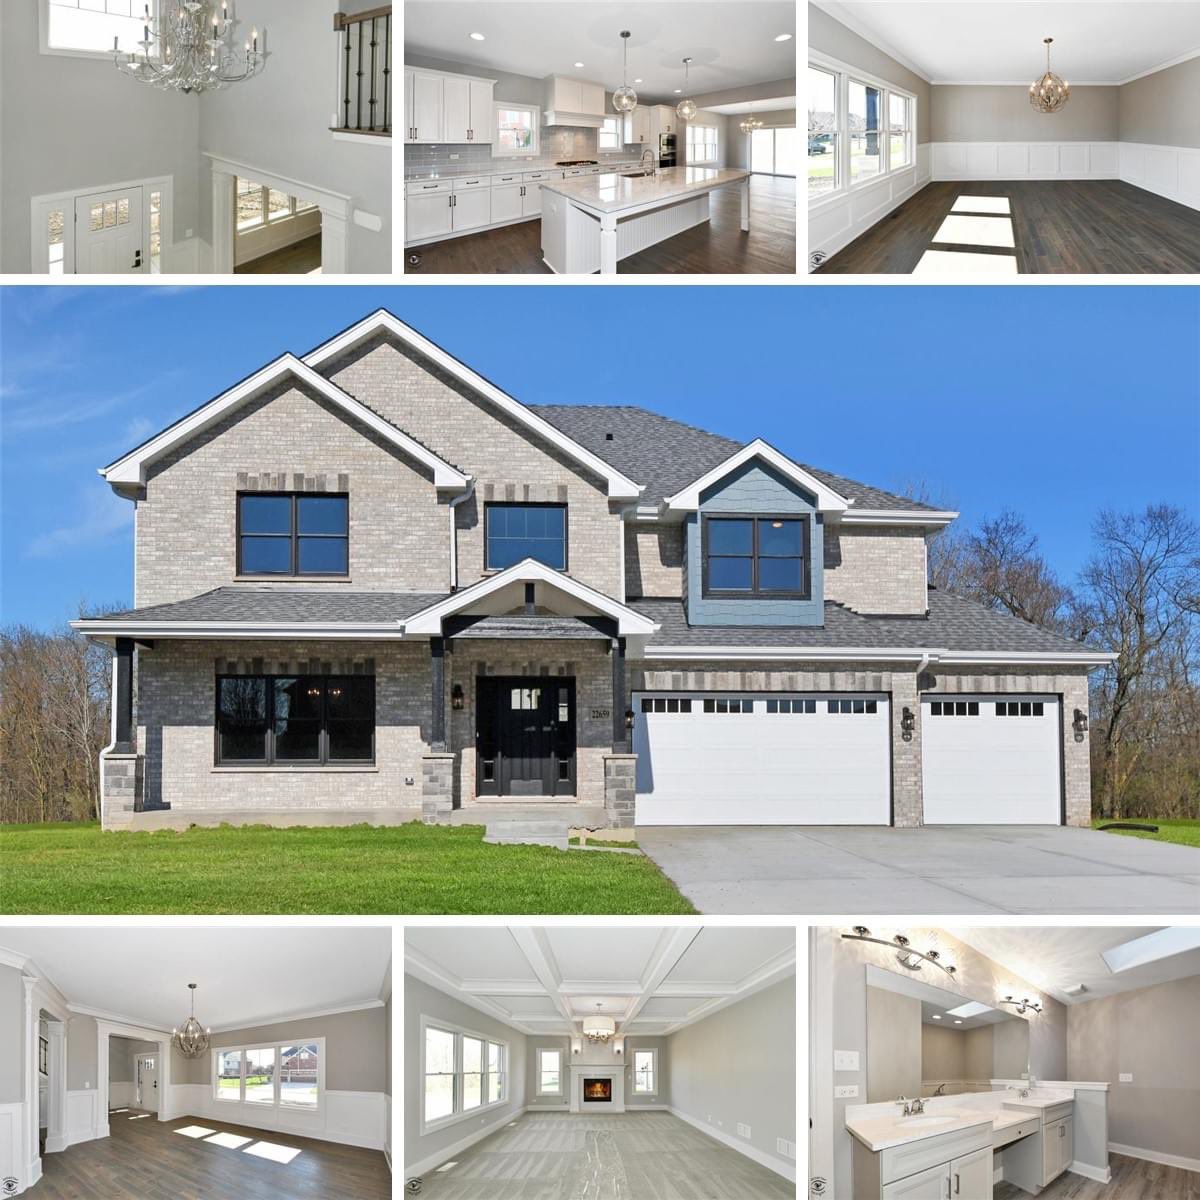 NEW, READY TO MOVE IN!

22659 Lilly Pad Frankfort IL - Schedule your PRIVATE, SAFE showing! 815-953-9100
#omalleybuilders #privateshowings #Omalleycares #customhomebuilder